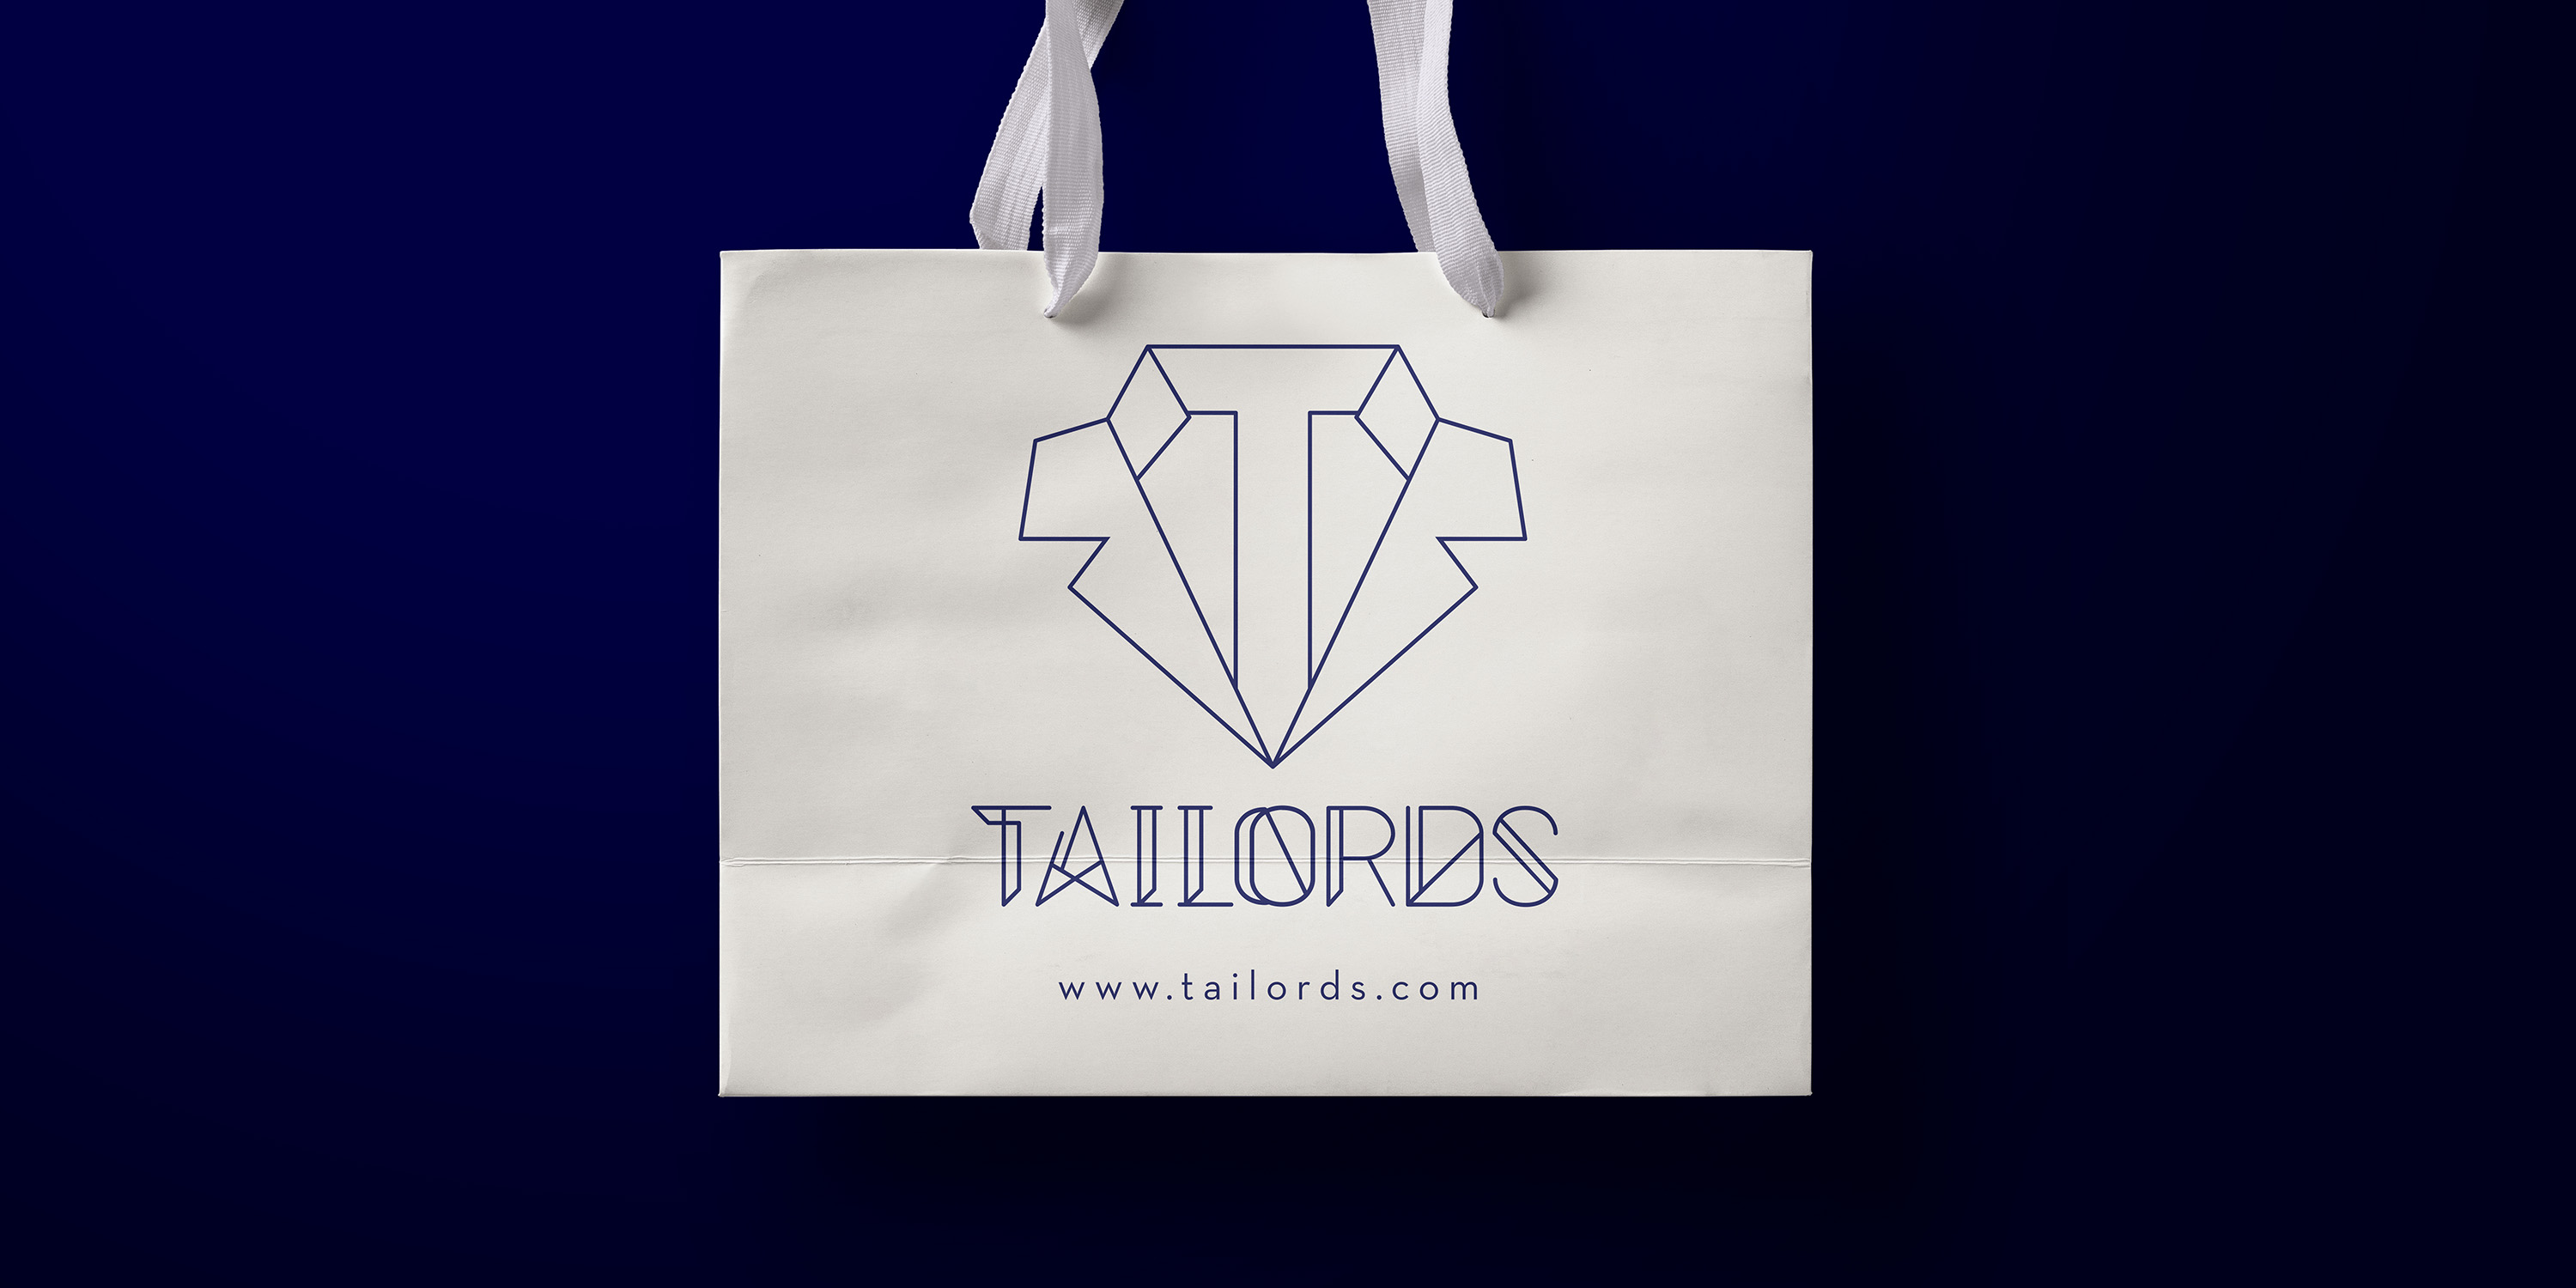 Tailords